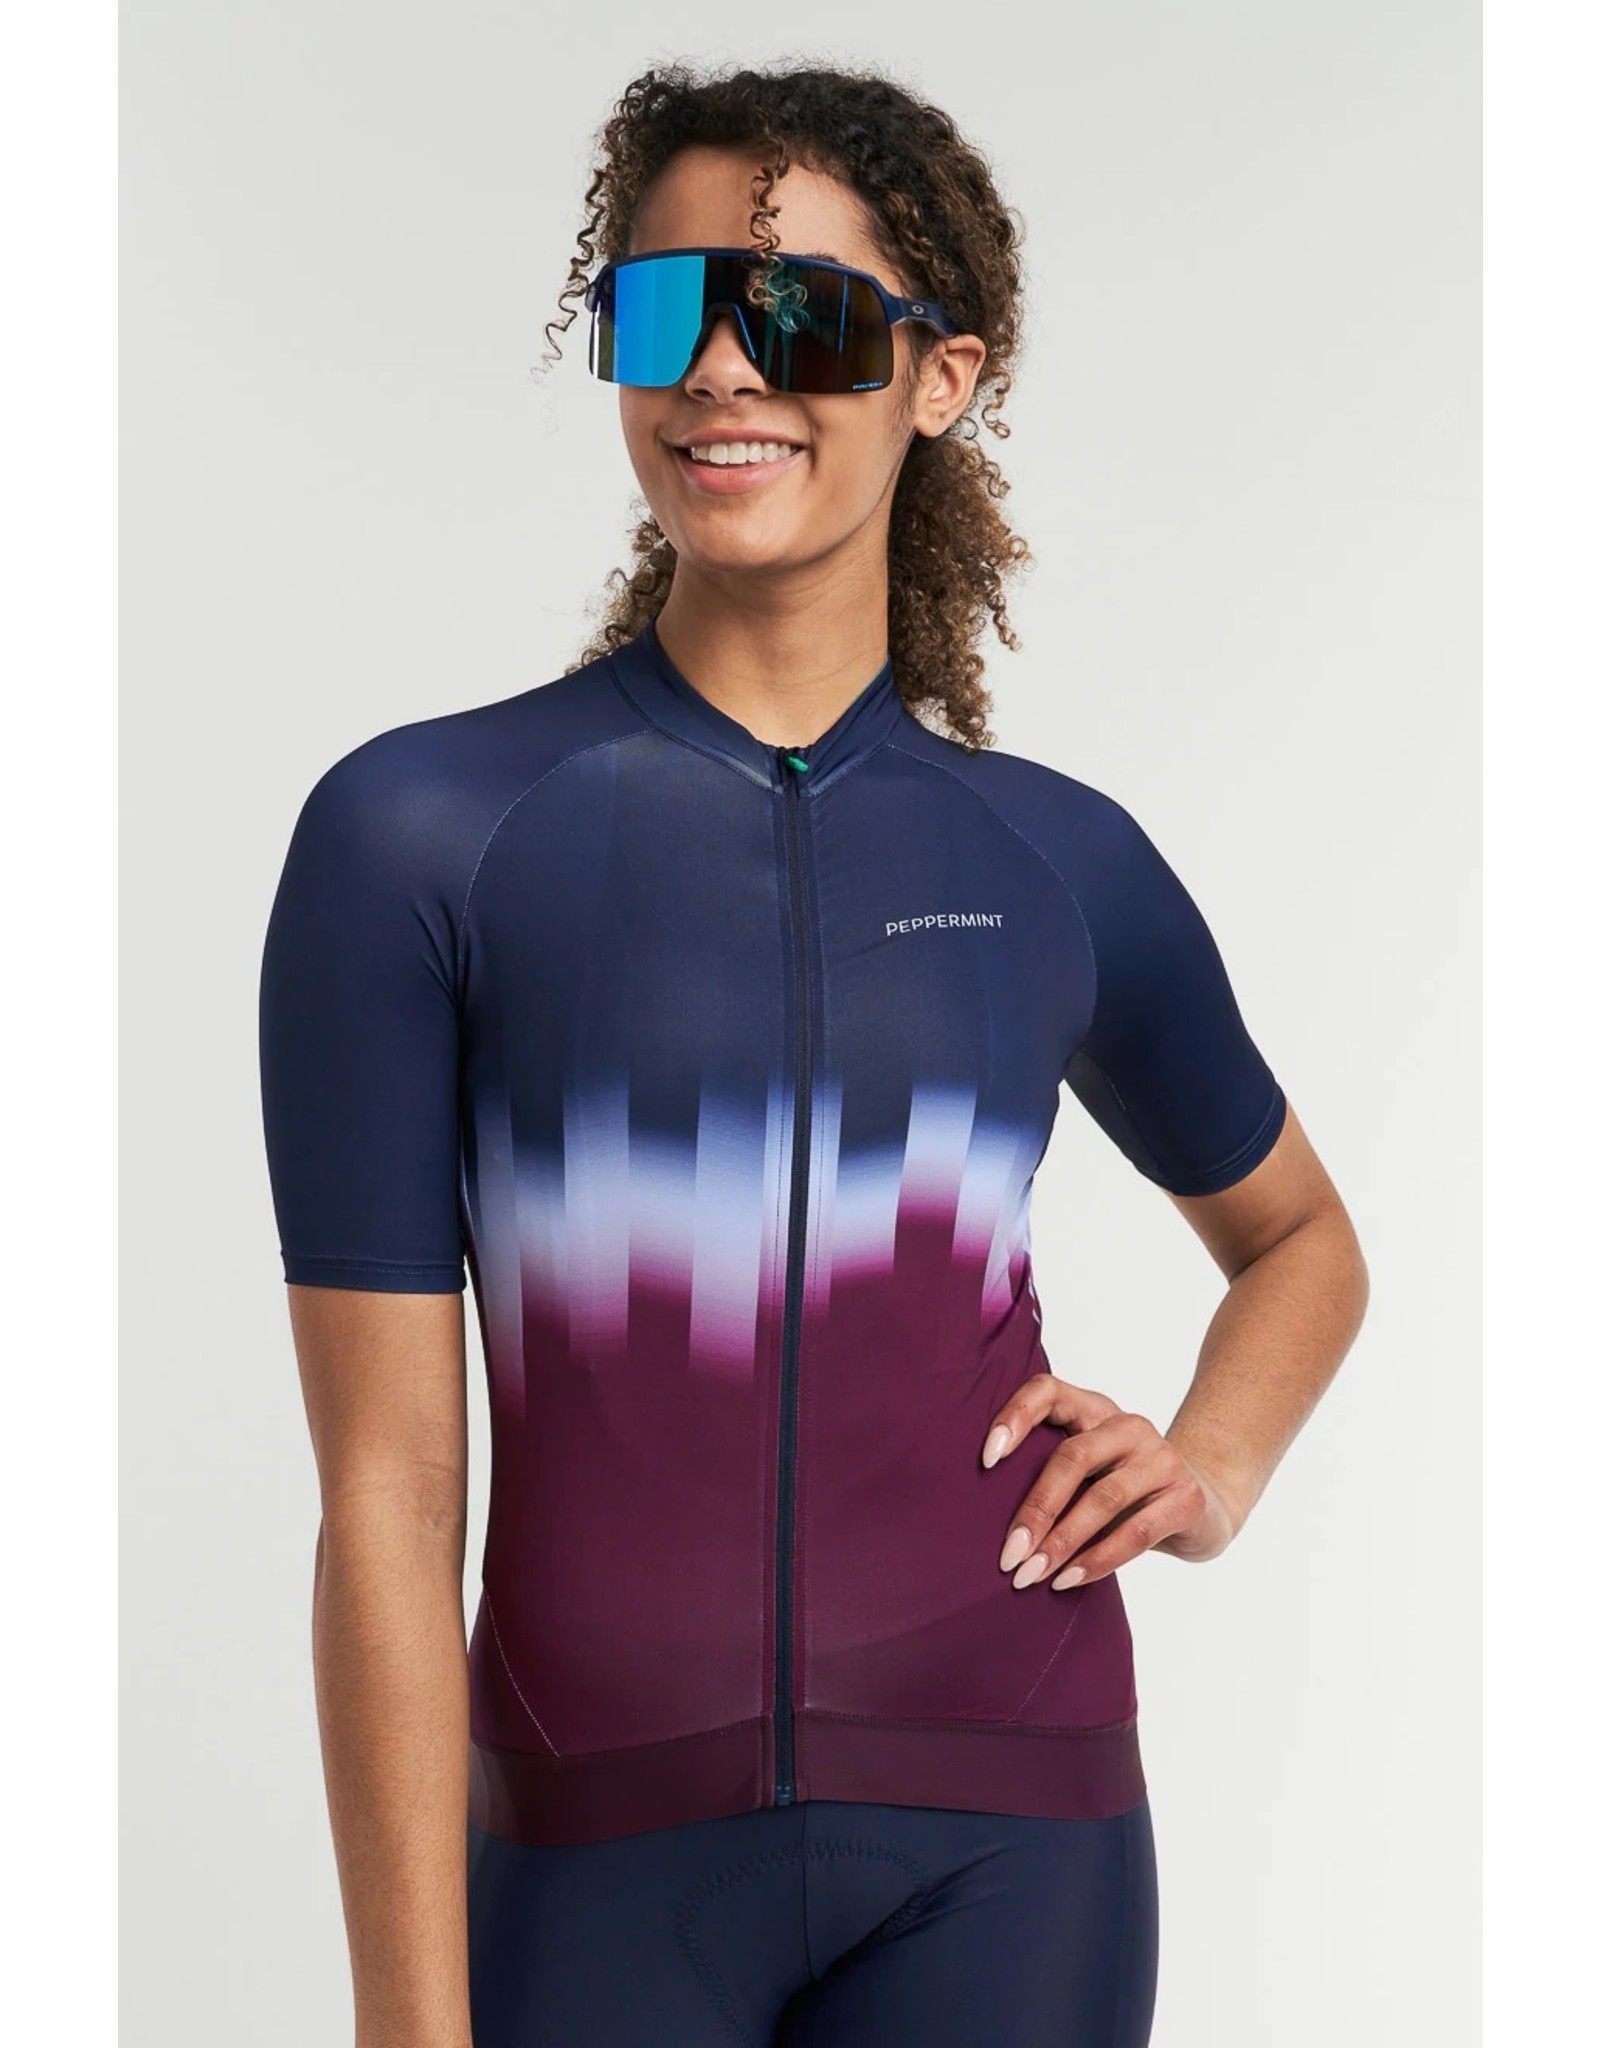 Peppermint '22, PEPPERMINT CYCLING, Signature Jersey, Borealis Burgundy